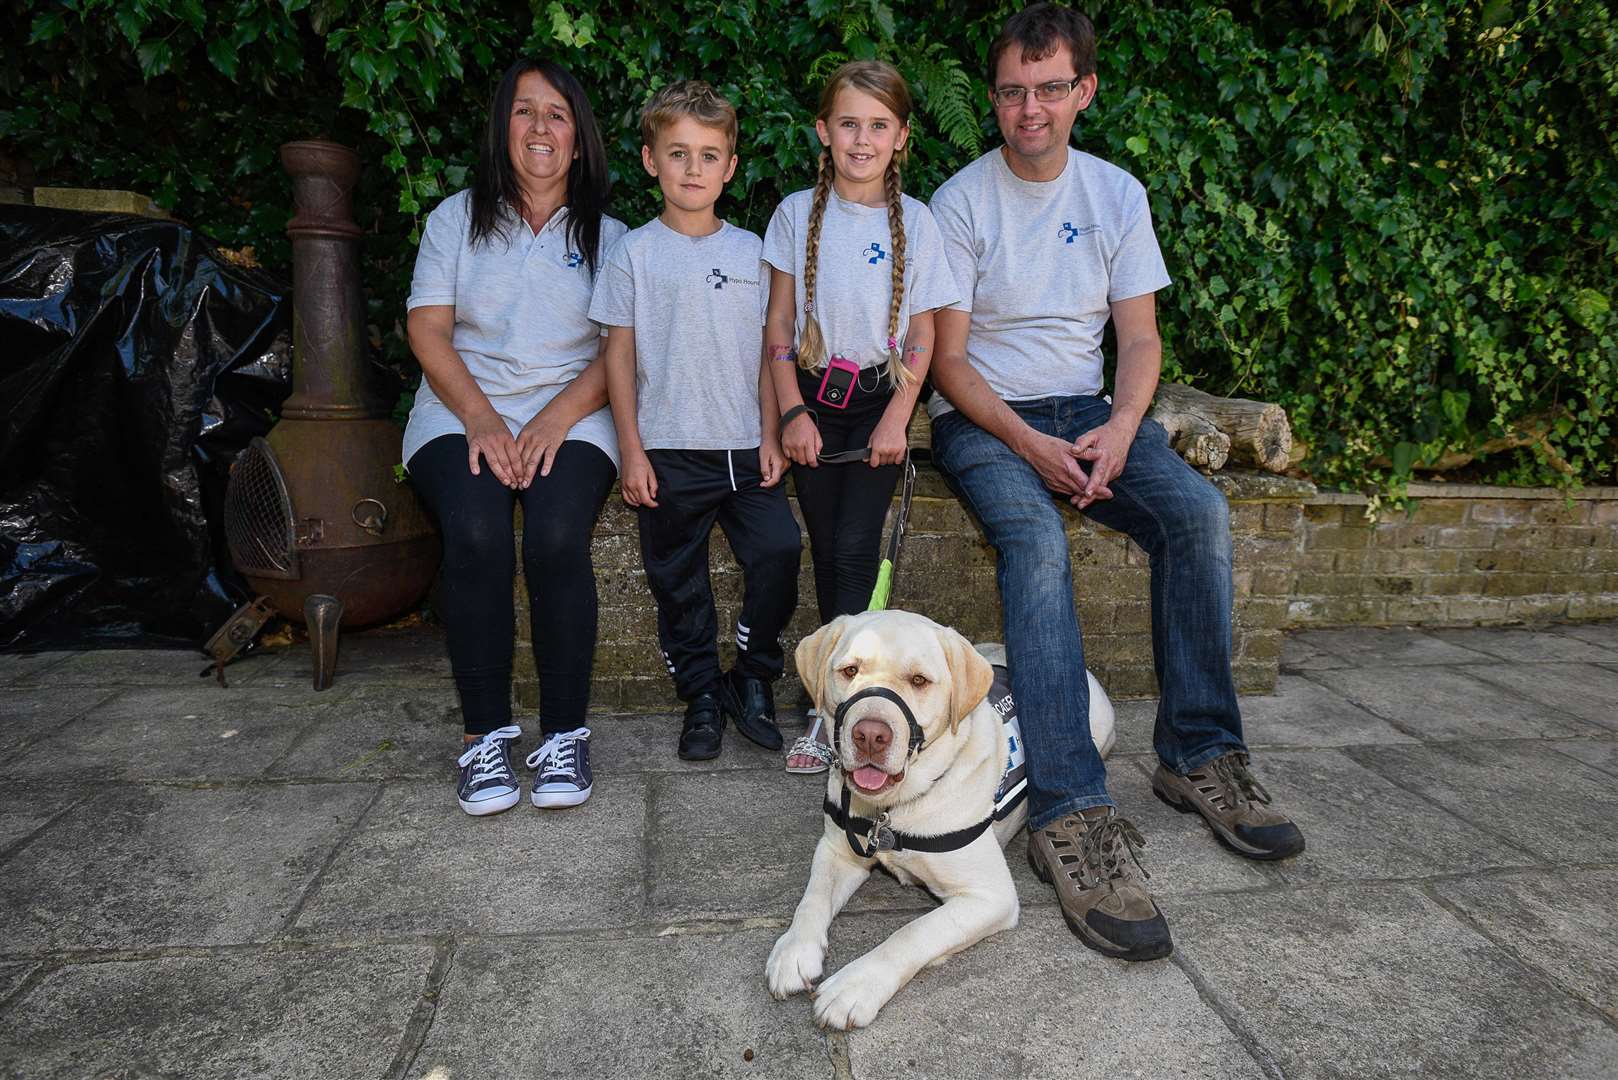 Nina, Elliot, Phoebe and Graham Denton. Nina Denton and her family have a diabetic alert dog, Teddy, who looks after their 8-year-old daughter and are fundraising for the charity Hypo Hounds to be able to train another one